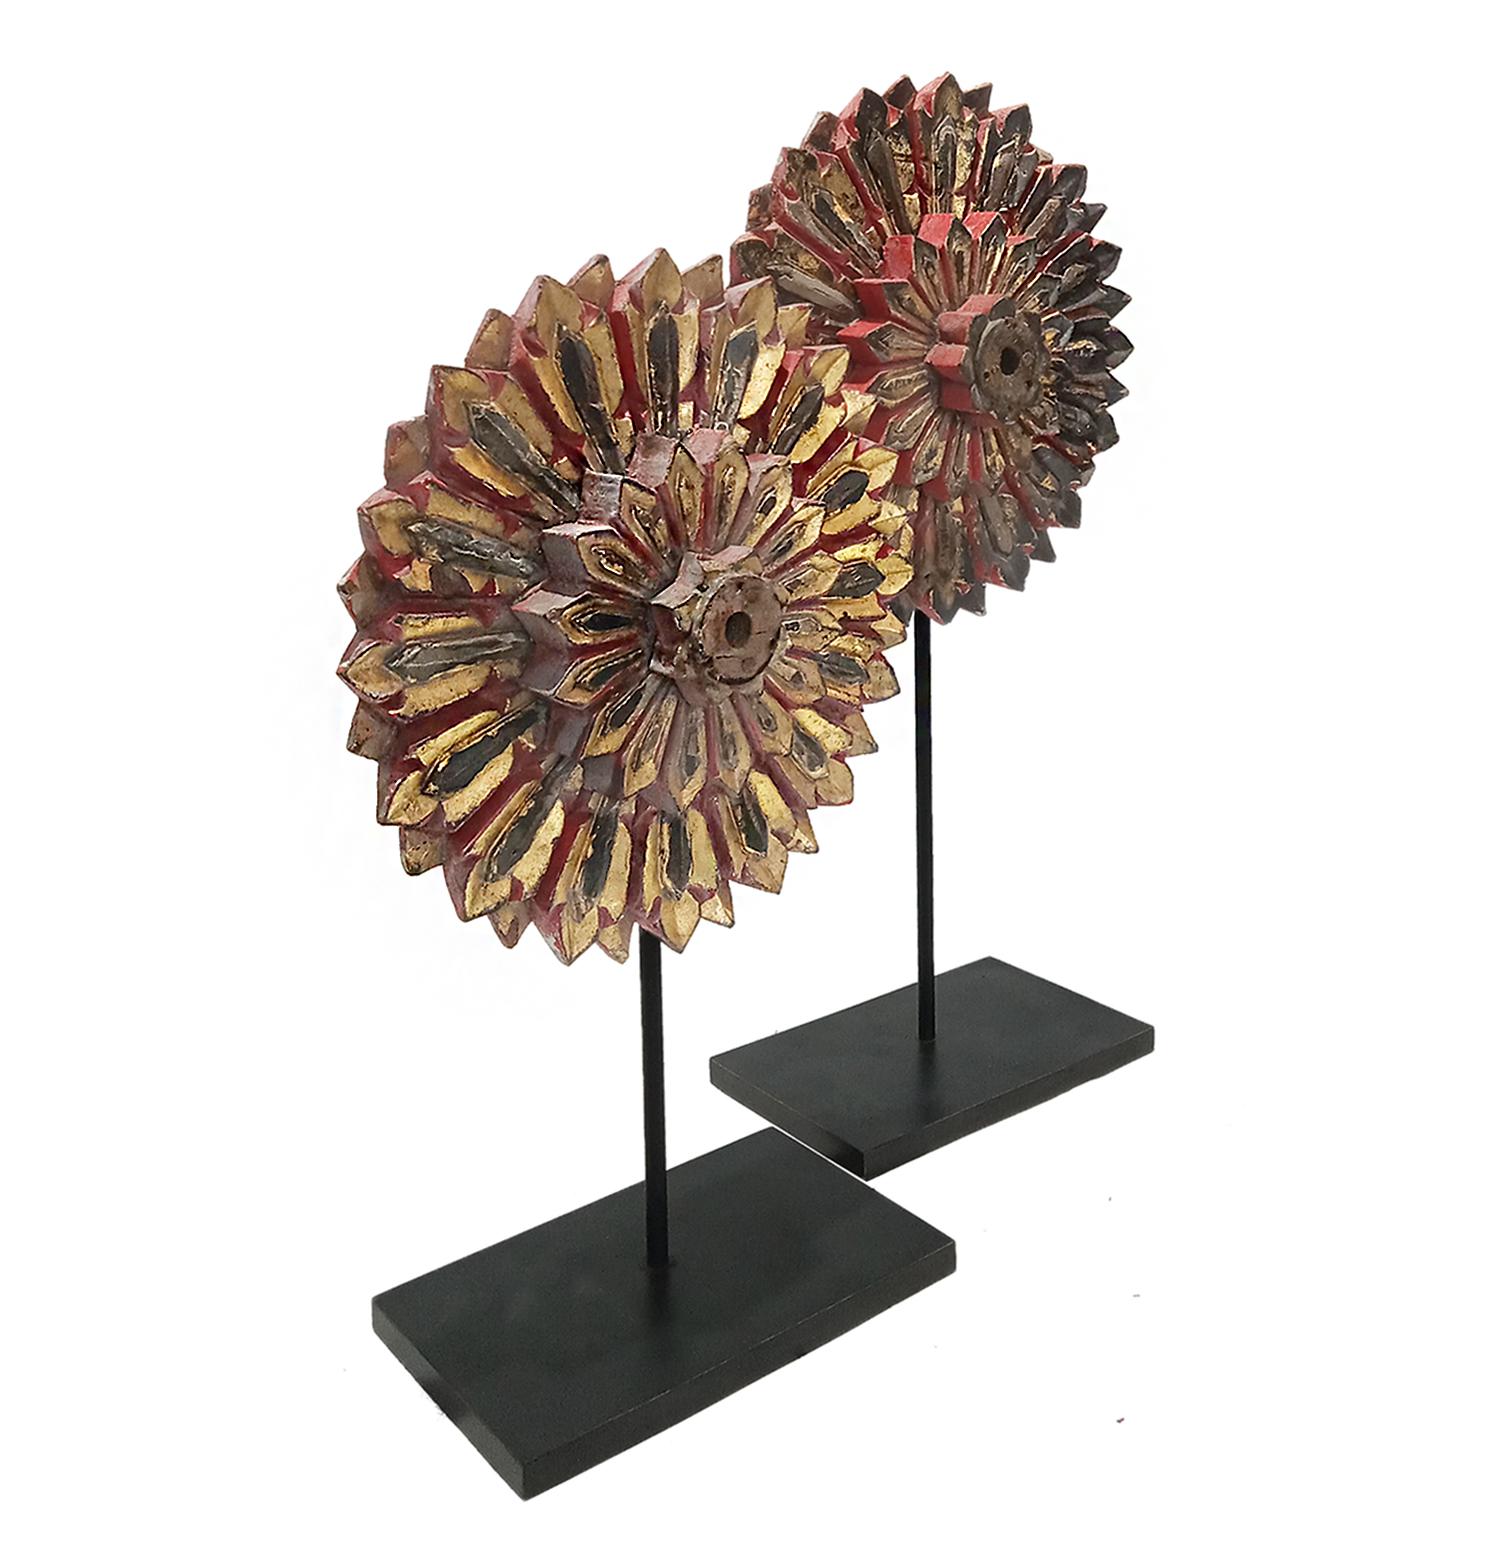 Thai Flower Sculptures, early 20th Century. 

Hand-carved out of reclaimed teakwood and repurposed from wheels to flower sculptures, these pieces are a very special sample of Thai artisan craftsmanship. Painted in red and gold, with black accents